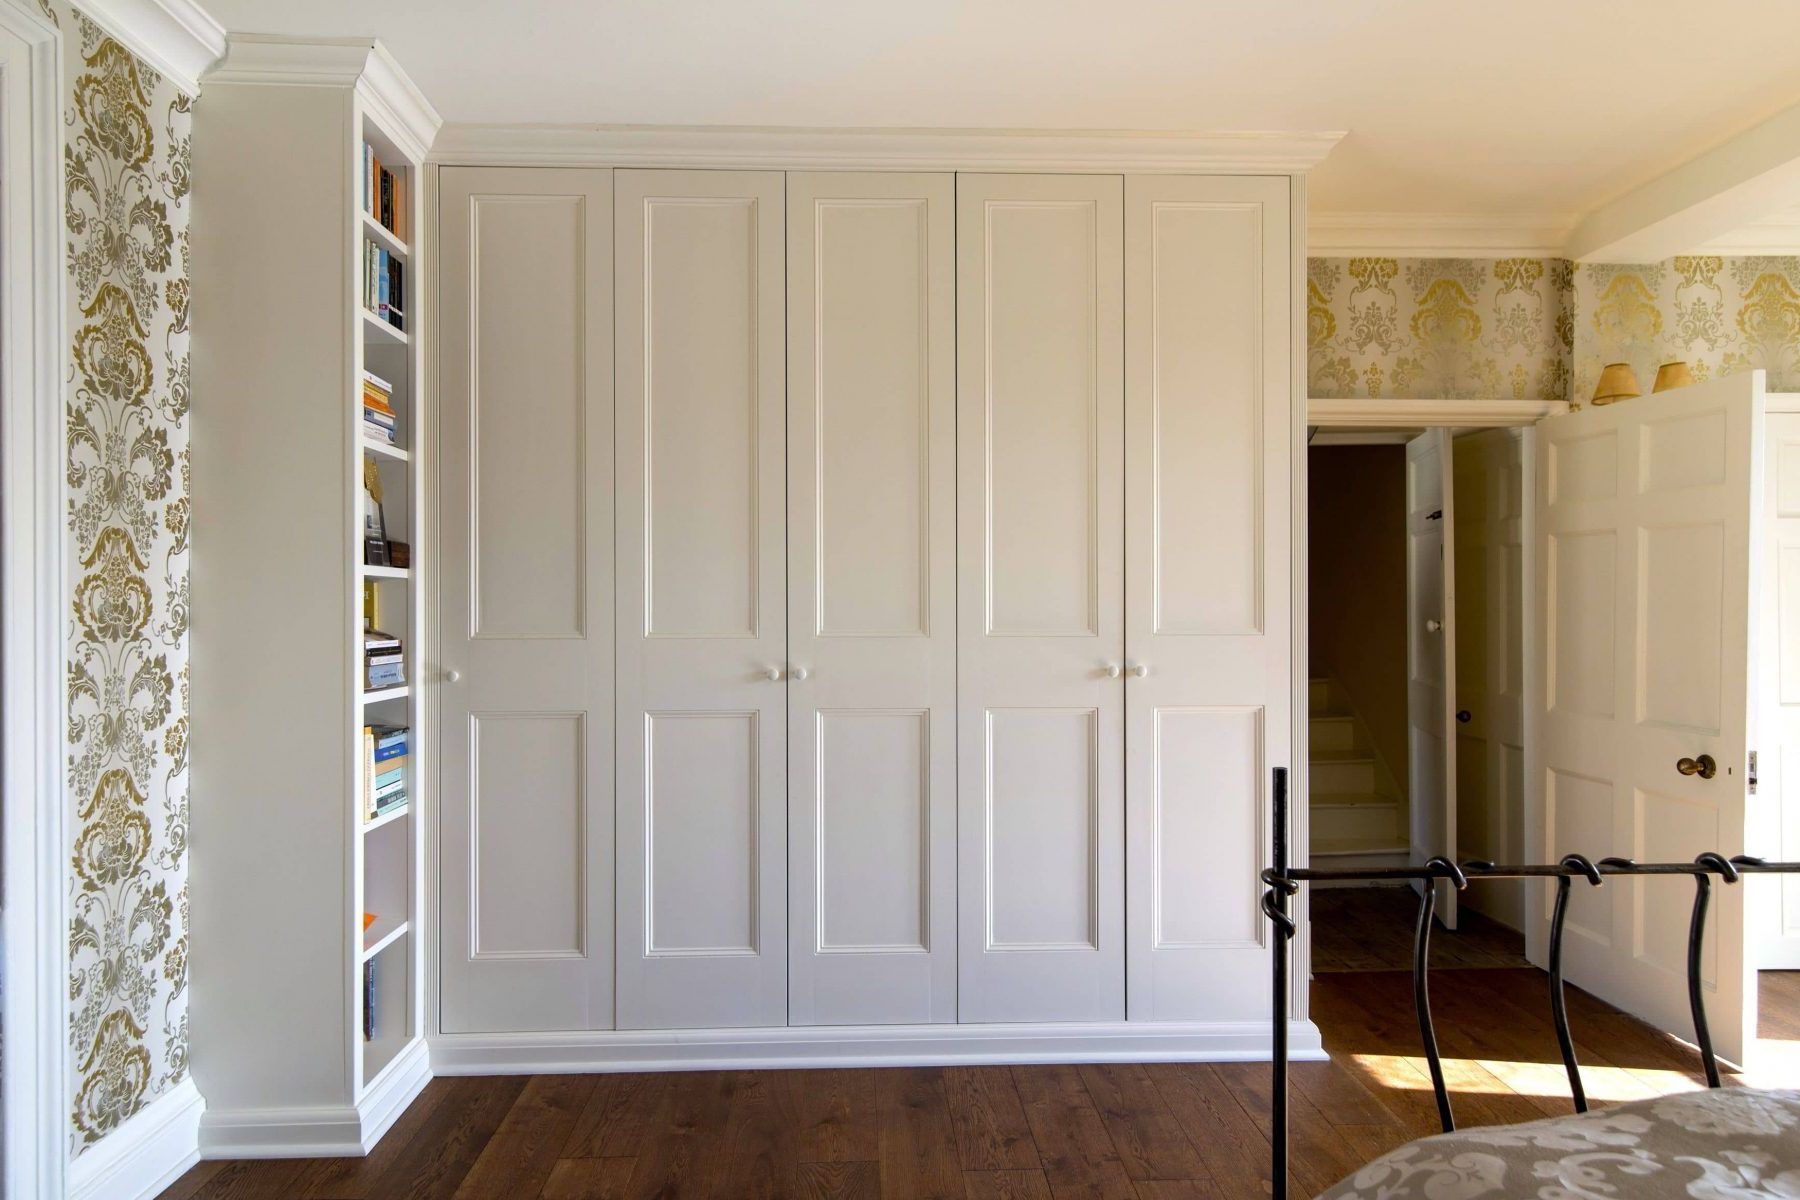 Image Result For Building Fitted Wardrobes Traditional Doors | Fitted  Wardrobes, Bespoke Wardrobe, Built In Wardrobe Within Traditional Wardrobes (Gallery 3 of 20)